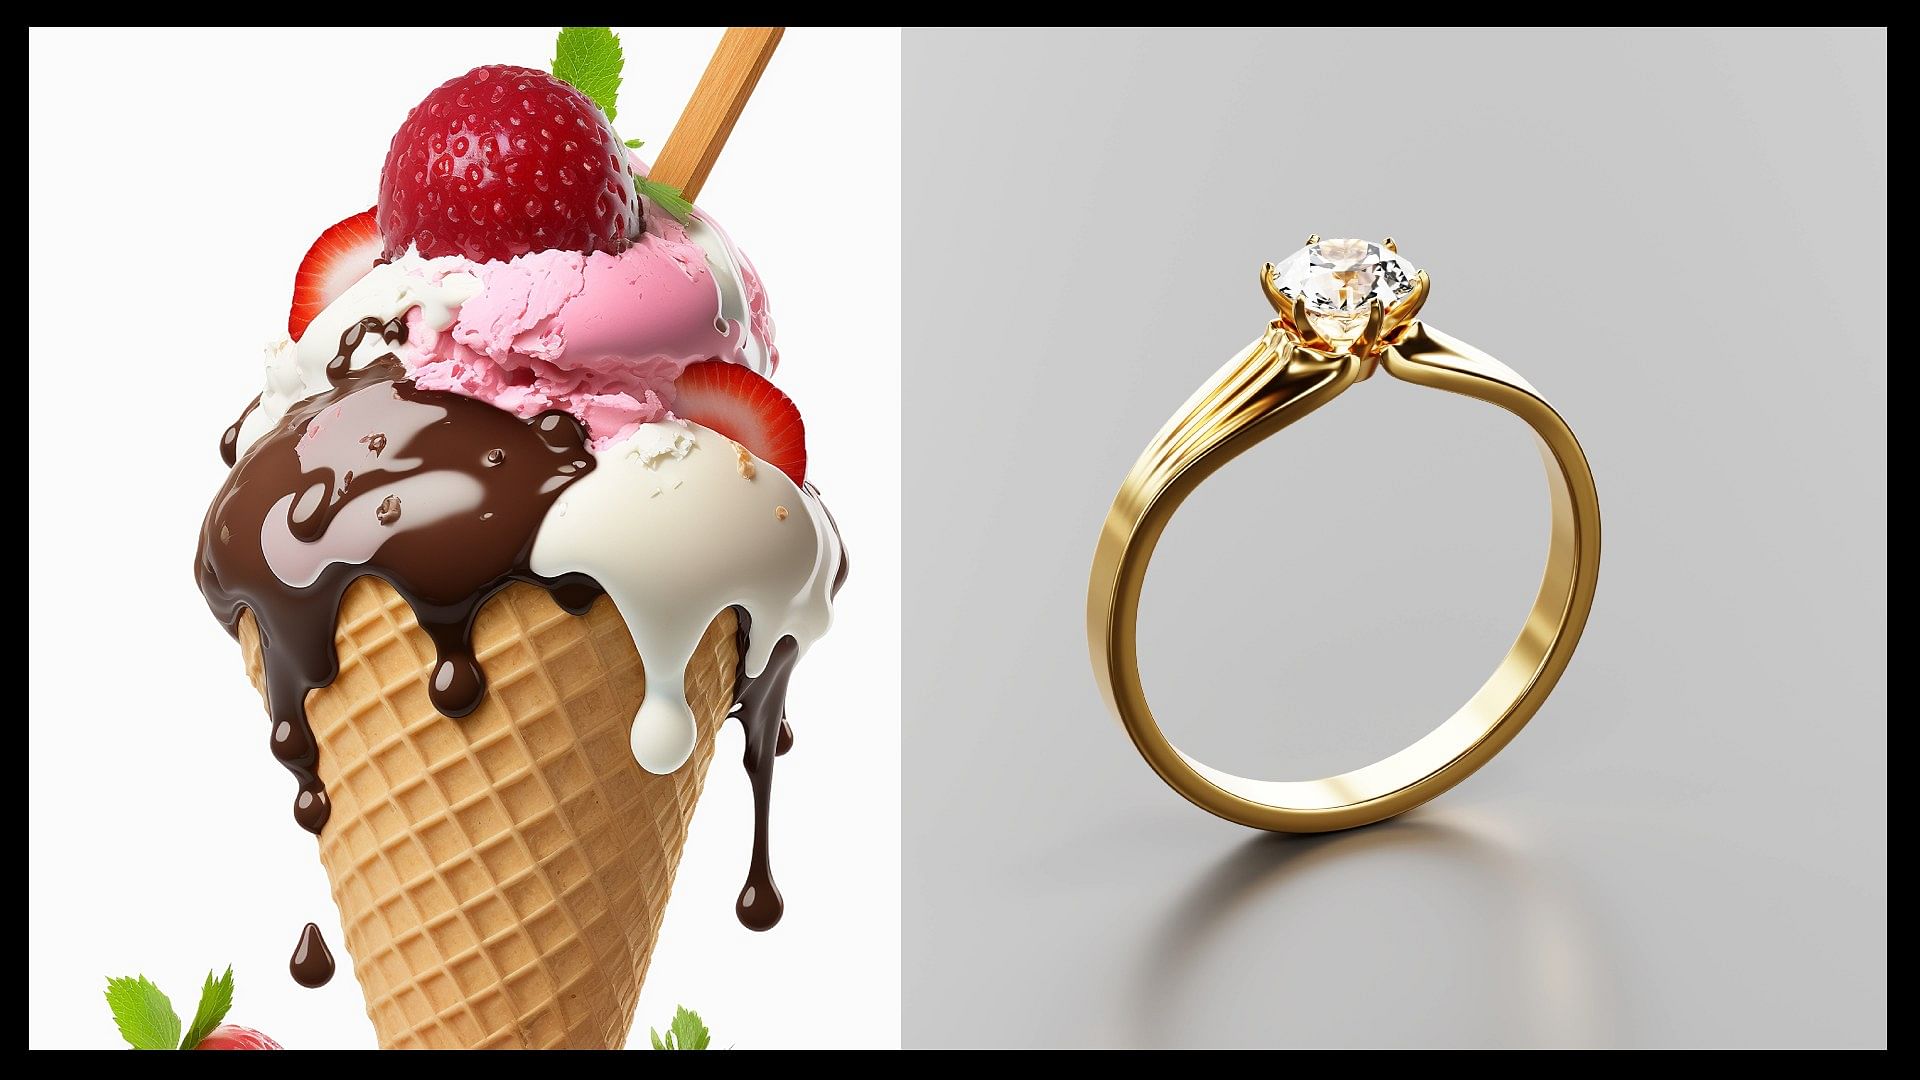 Boy surprise her girlfriend by hiding ring in icecream know what happened then